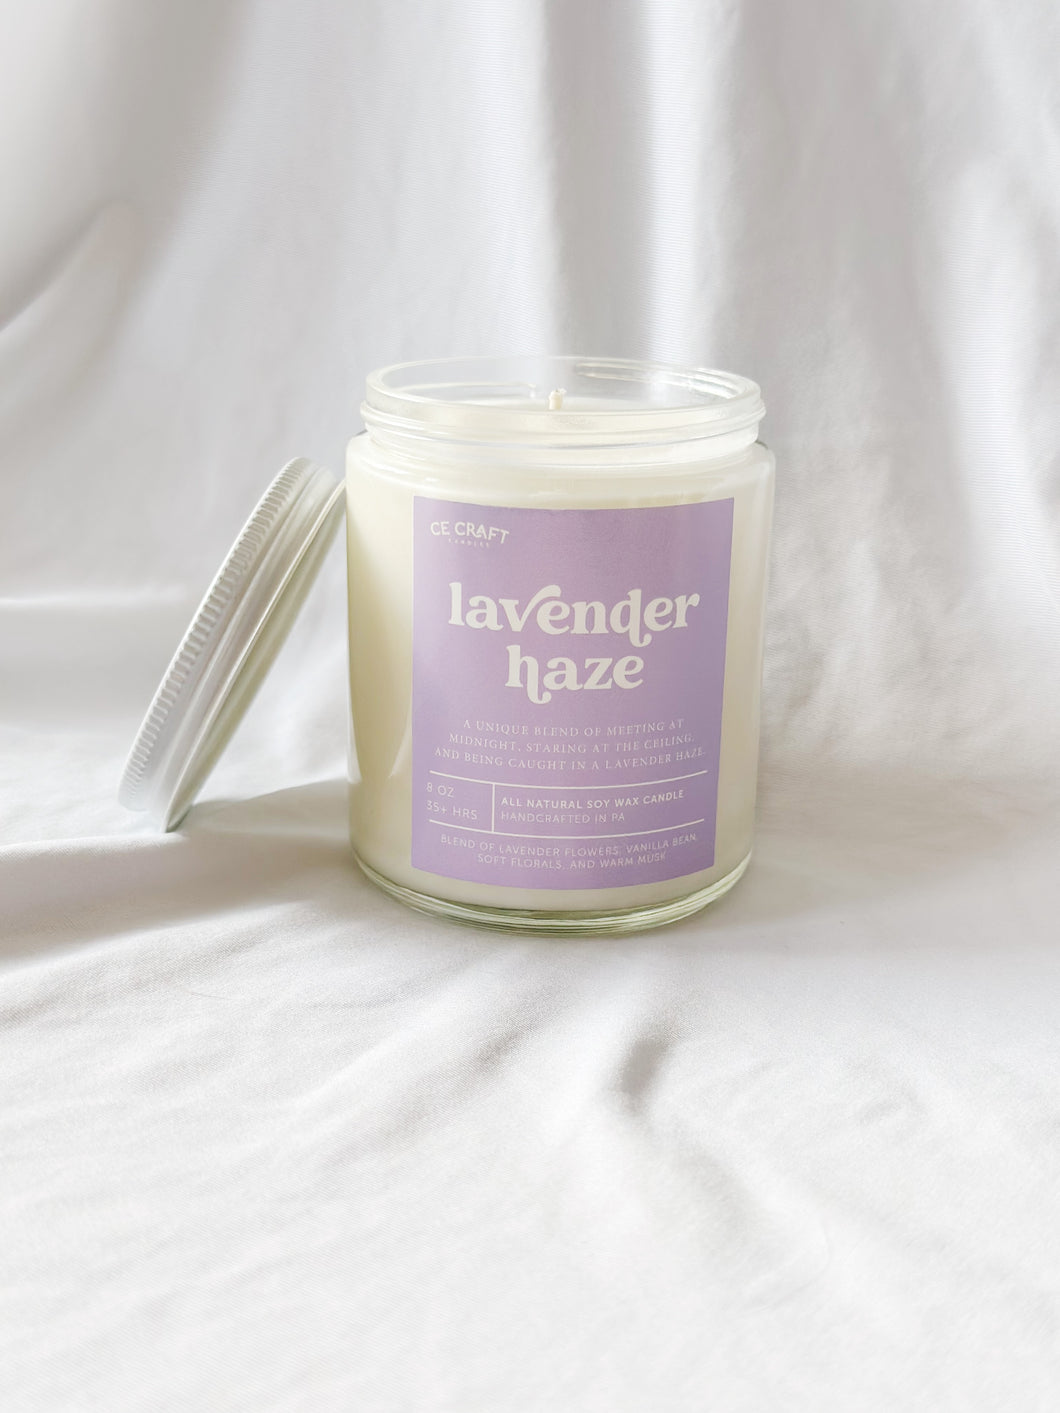 Lavender Haze Candle - Taylor Swift Inspired